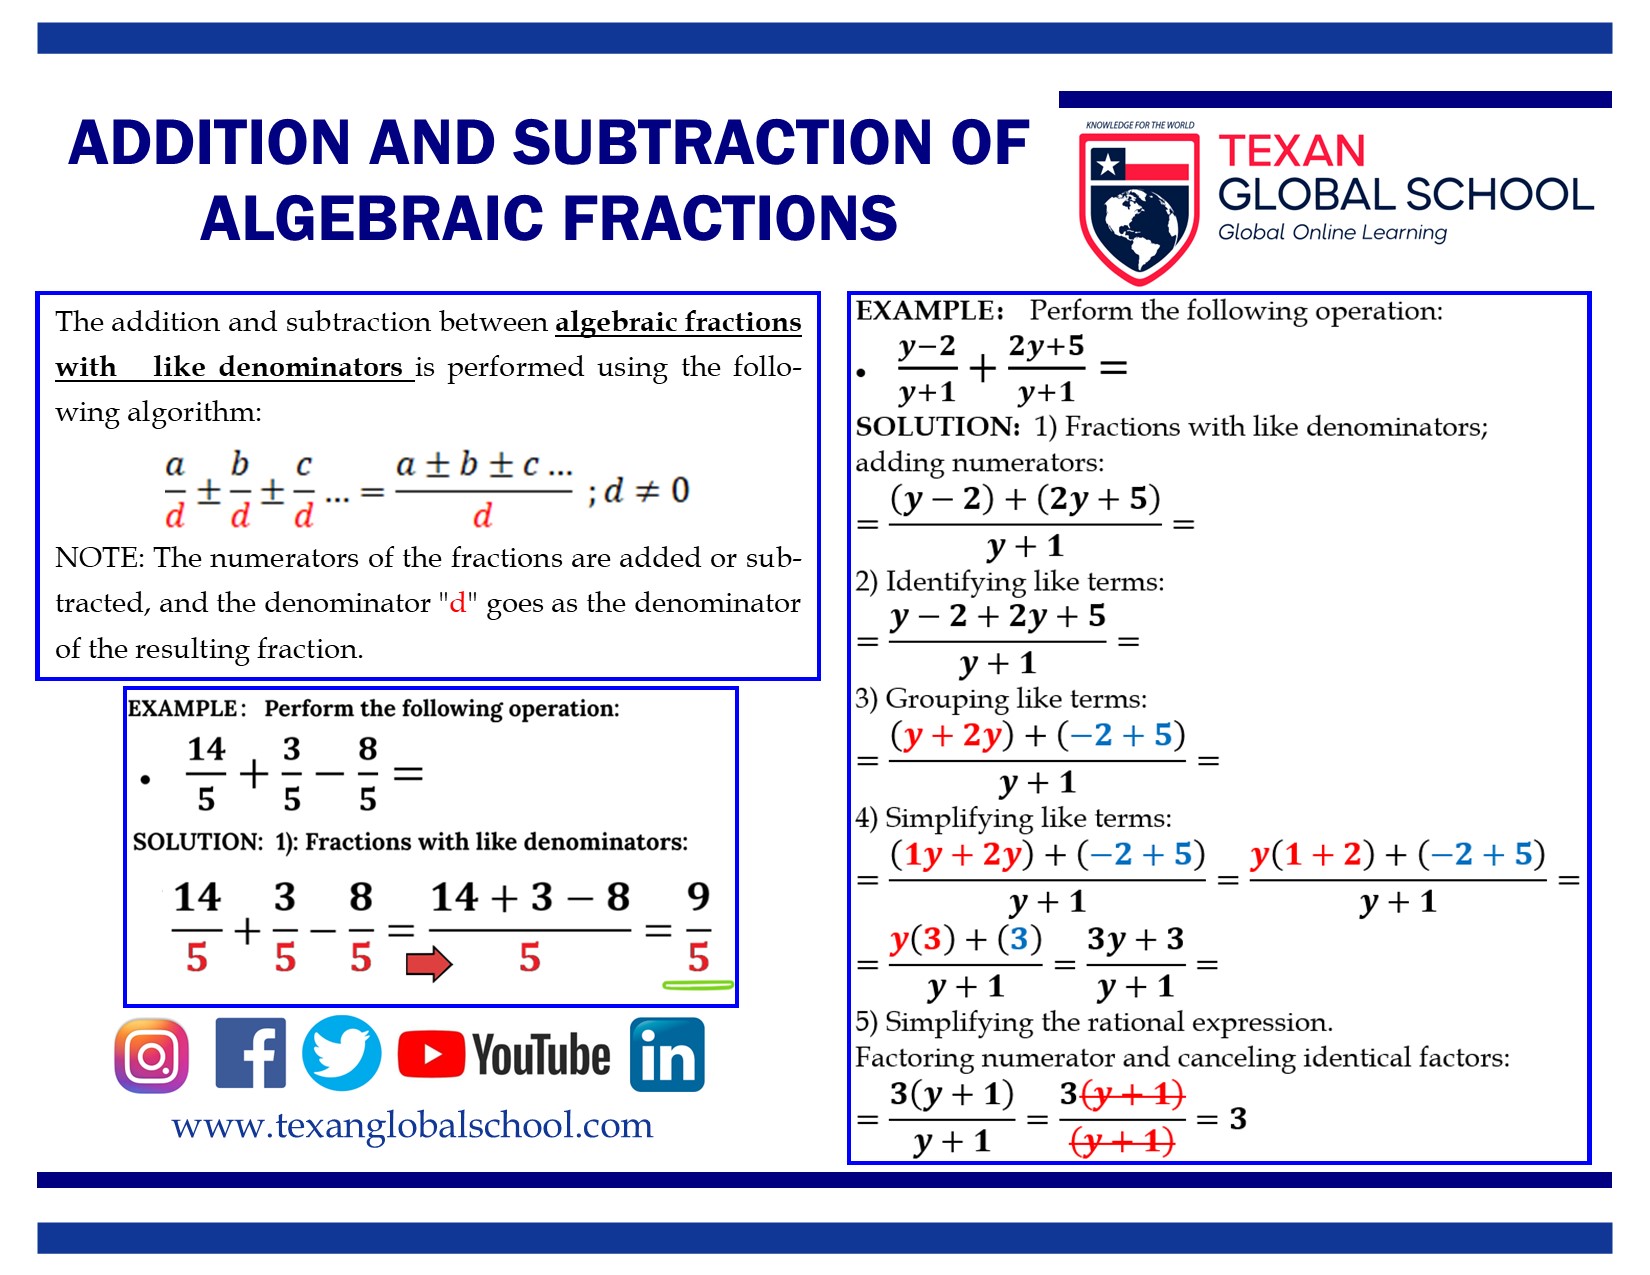 Addition and Subtraction between Algebraic Fractions – Part 1